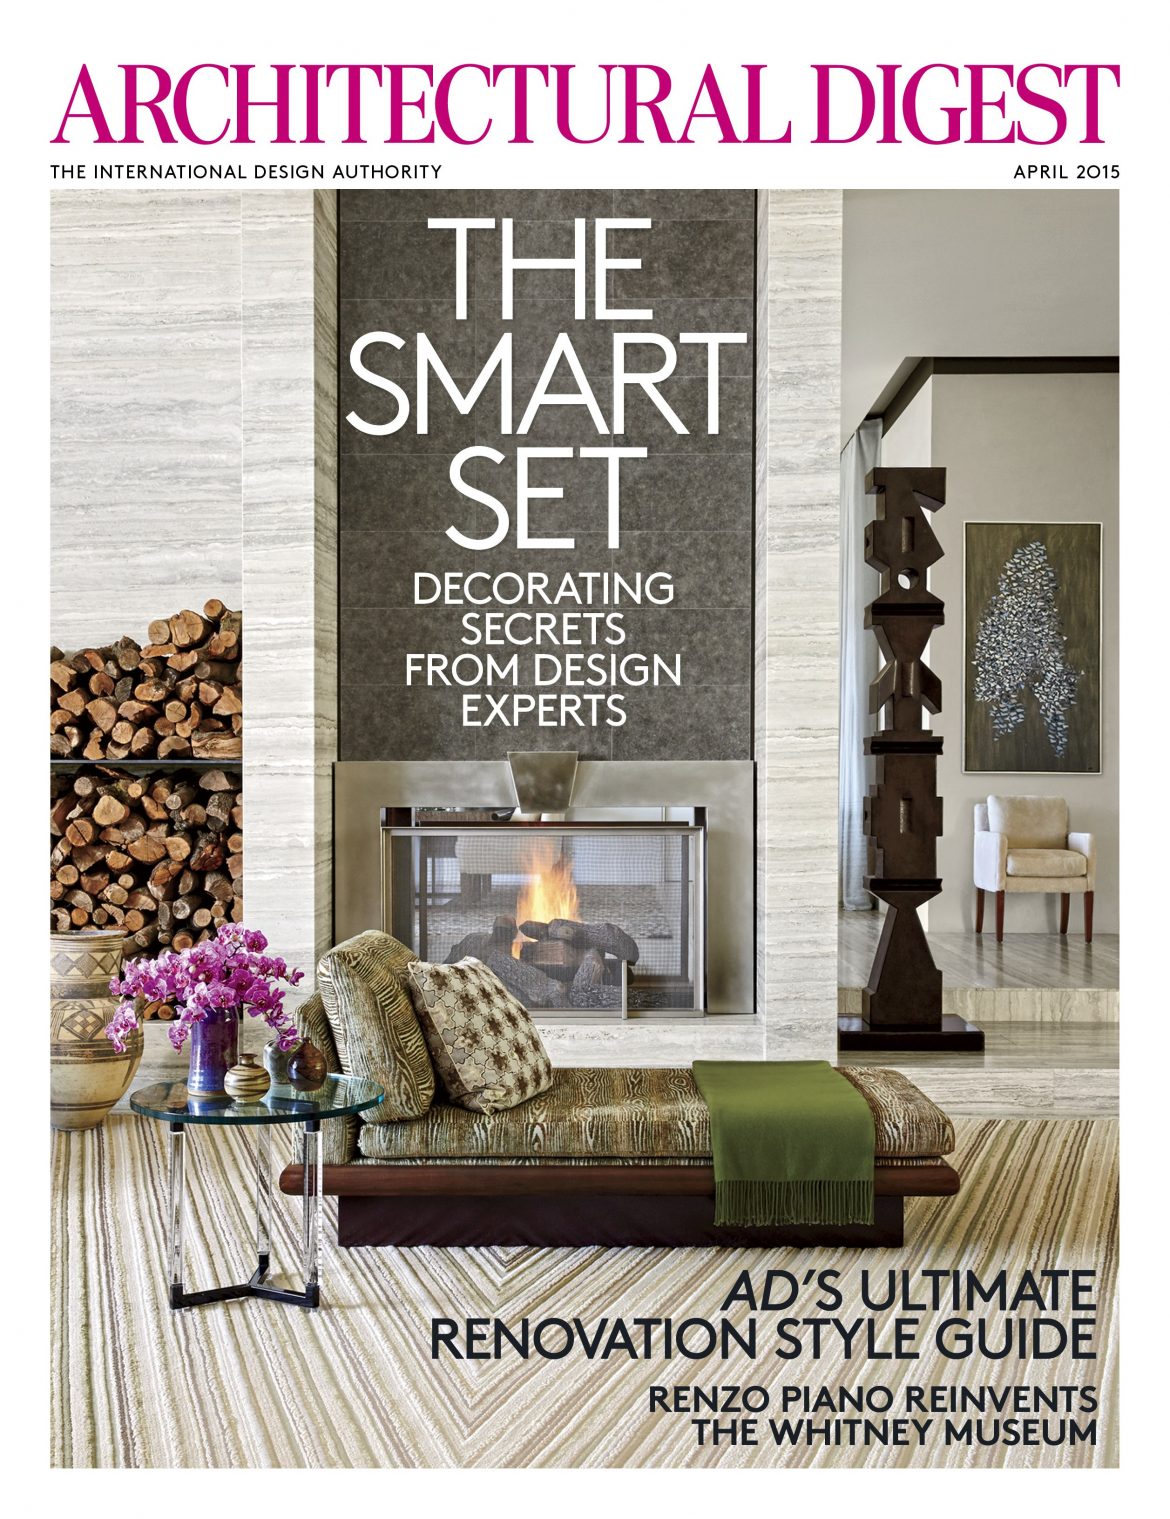 Top 5 Editor's Choice Best Magazines for Interior Designers and Architects ➤ To see more news about the Interior Design Magazines in the world visit us at www.interiordesignmagazines.eu #interiordesignmagazines #designmagazines #interiordesign @imagazines